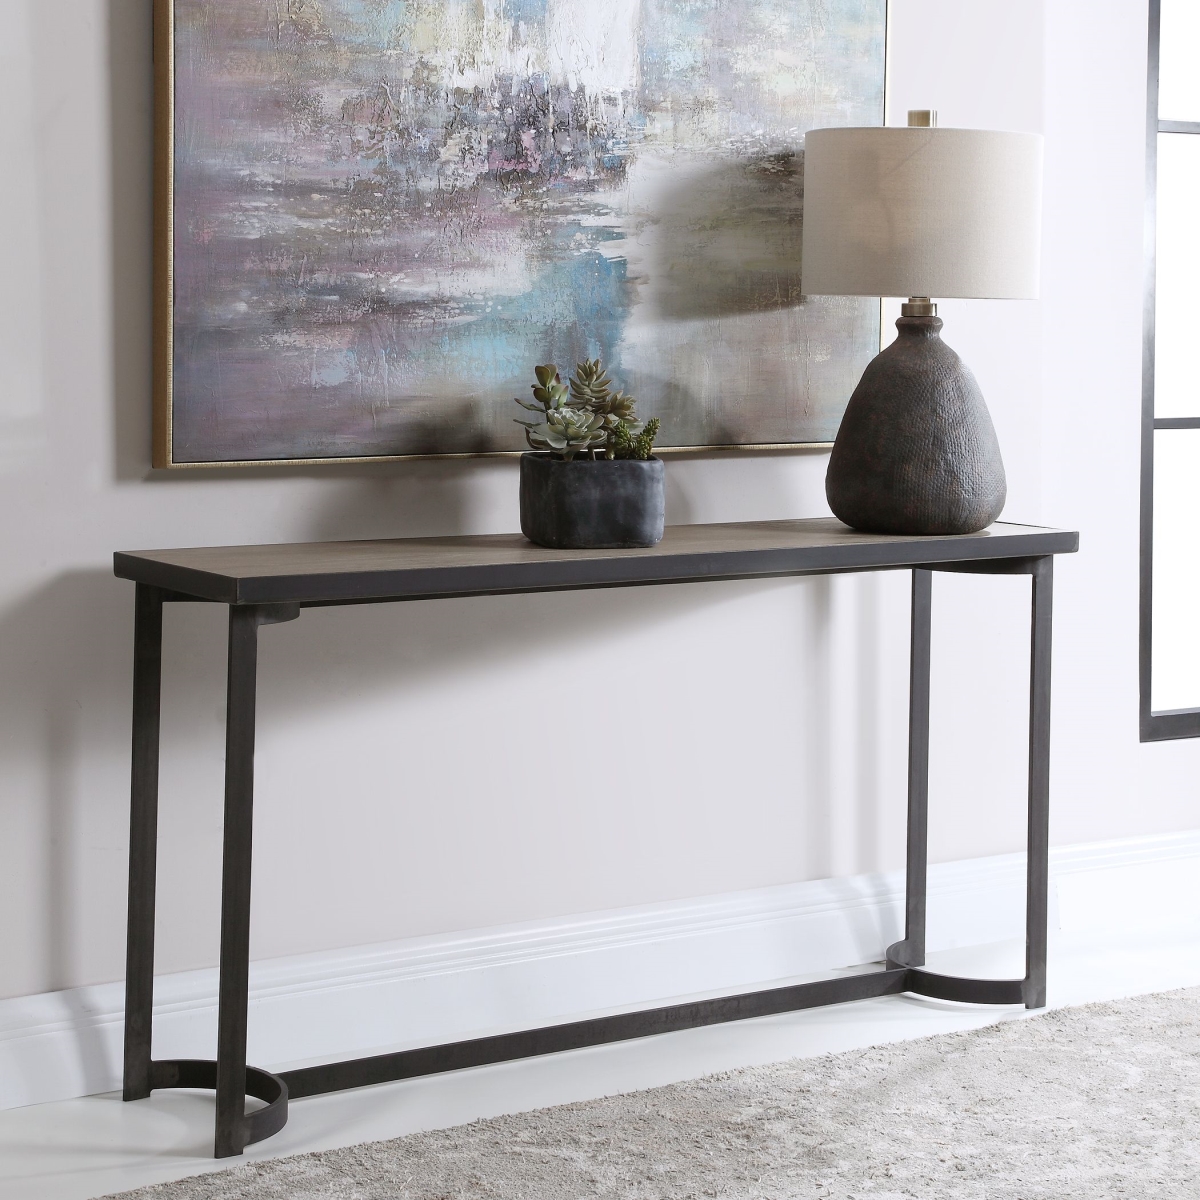 Picture of 212 Main 24951 24 x 40 x 69 in. Basuto Steel Console Table